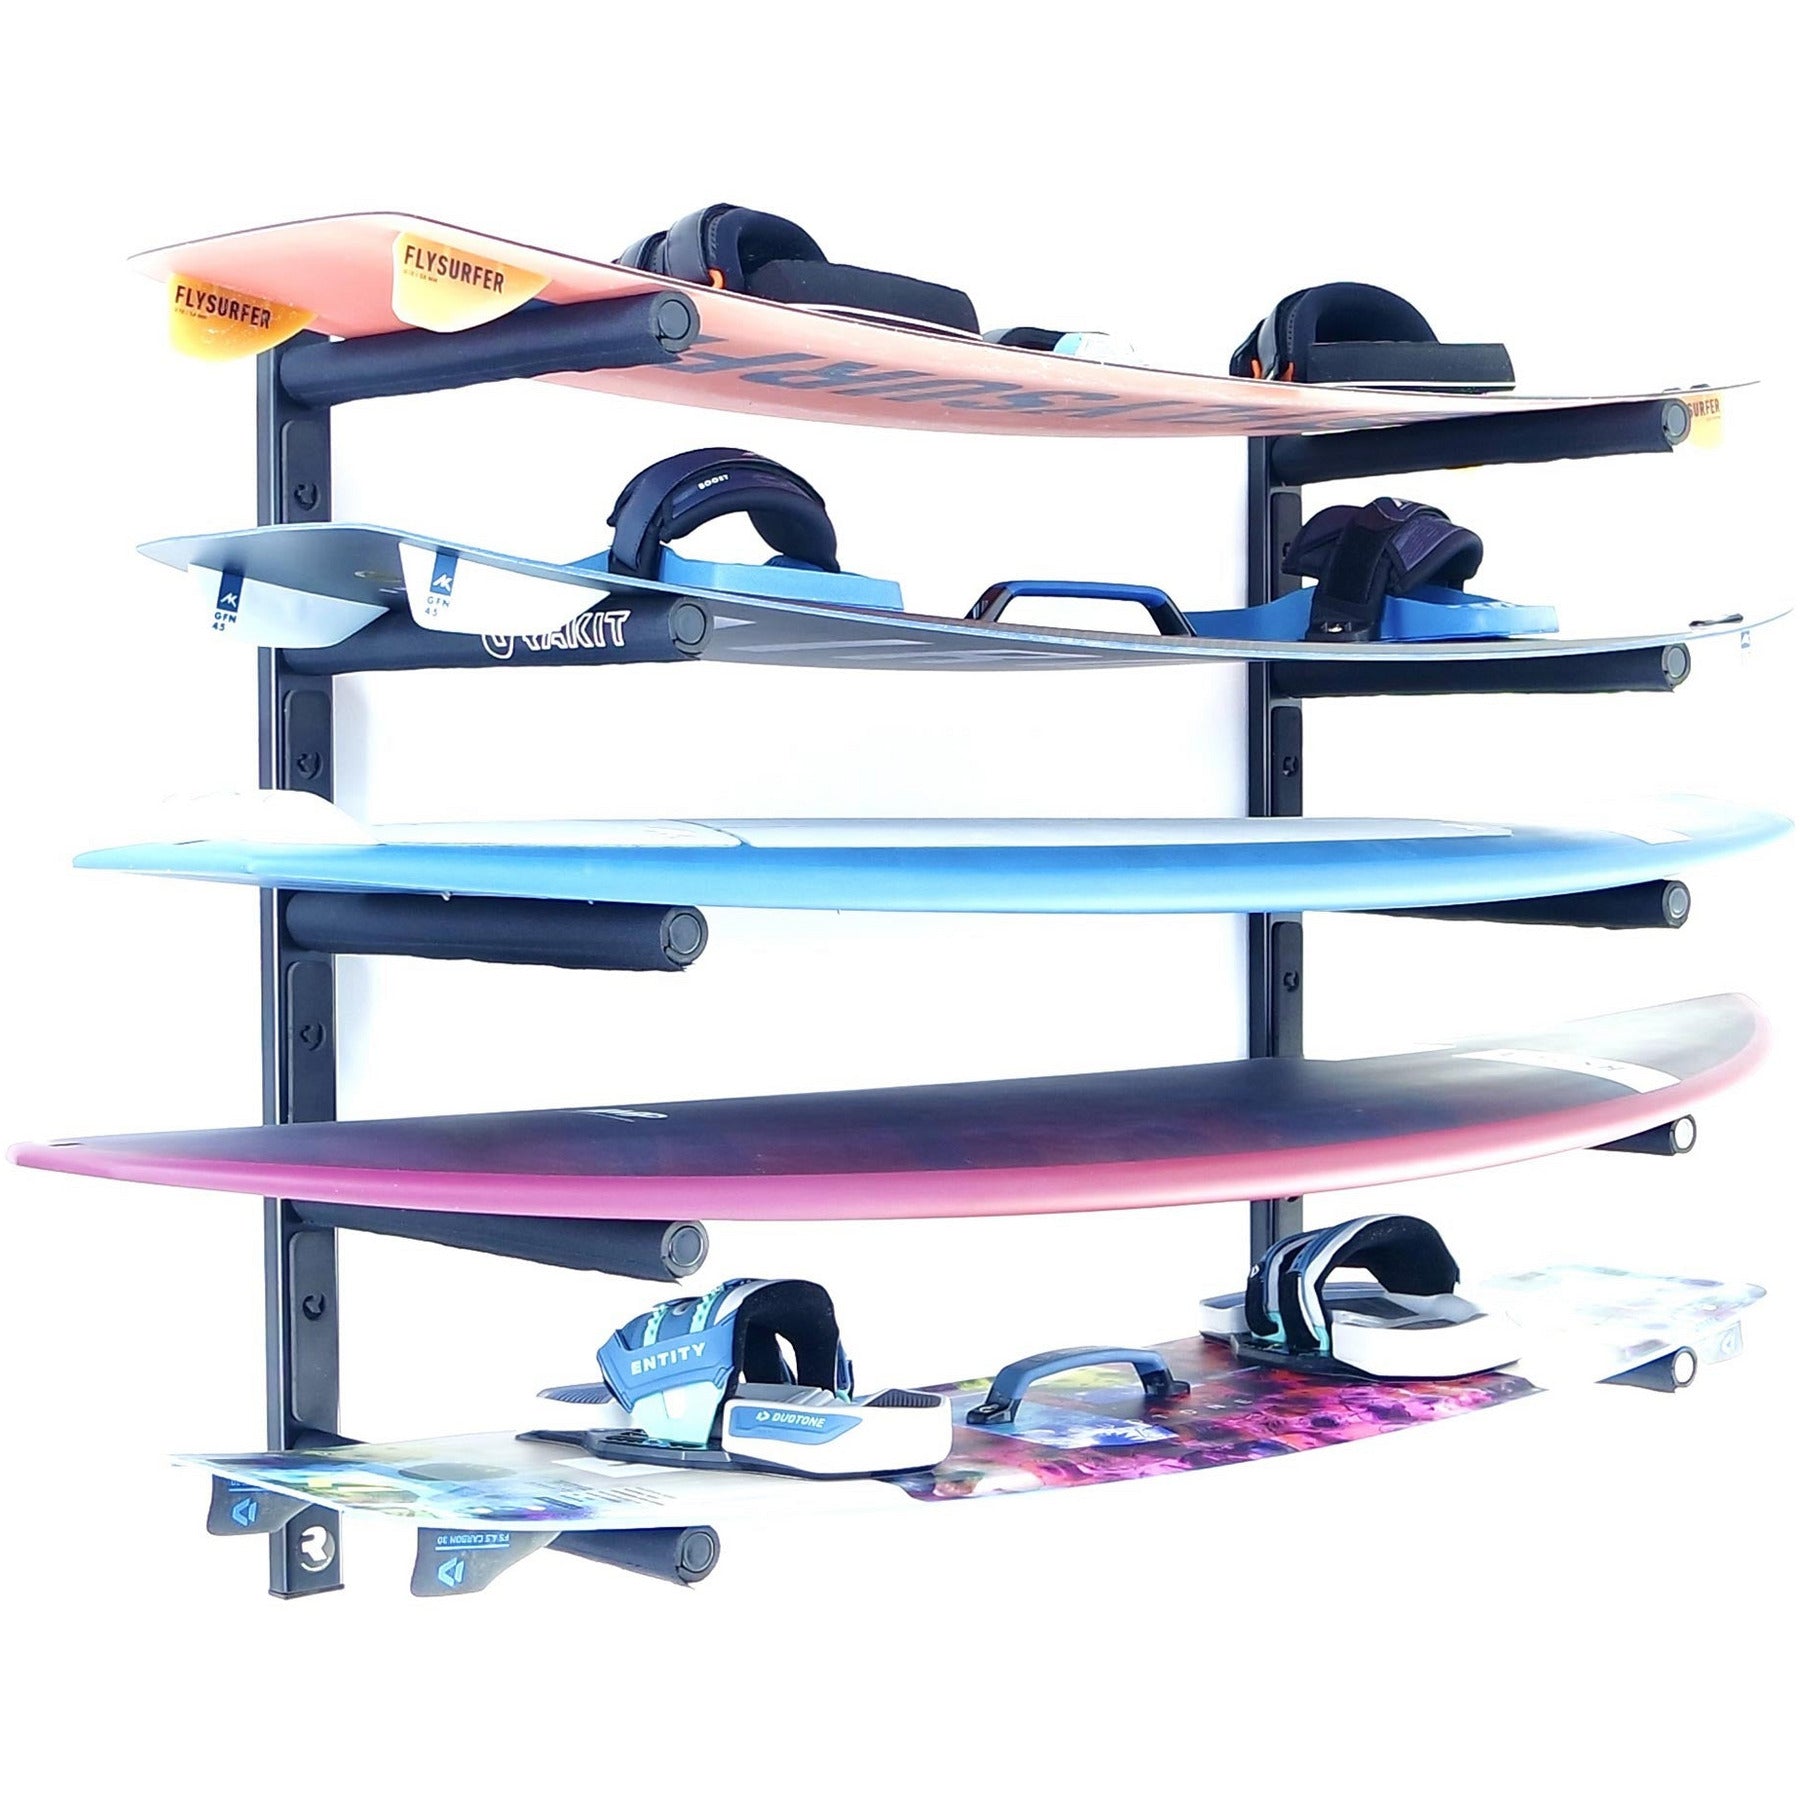 Wall mounted board rack for five boards. Strong and durable aluminium construction. Full foam protection pads. Fixing kit included. Free delivery in SA. BOARD RACKS | SURFBOARD RACK | SURF RACKS FOR WALL | SURFBOARD STORAGE | RAKIT | CAPE TOWN | SOUTH AFRICA | #WHEREBOARDSSLEEP | SURF | RACK | GARGE | BOARD | STORAGE | 